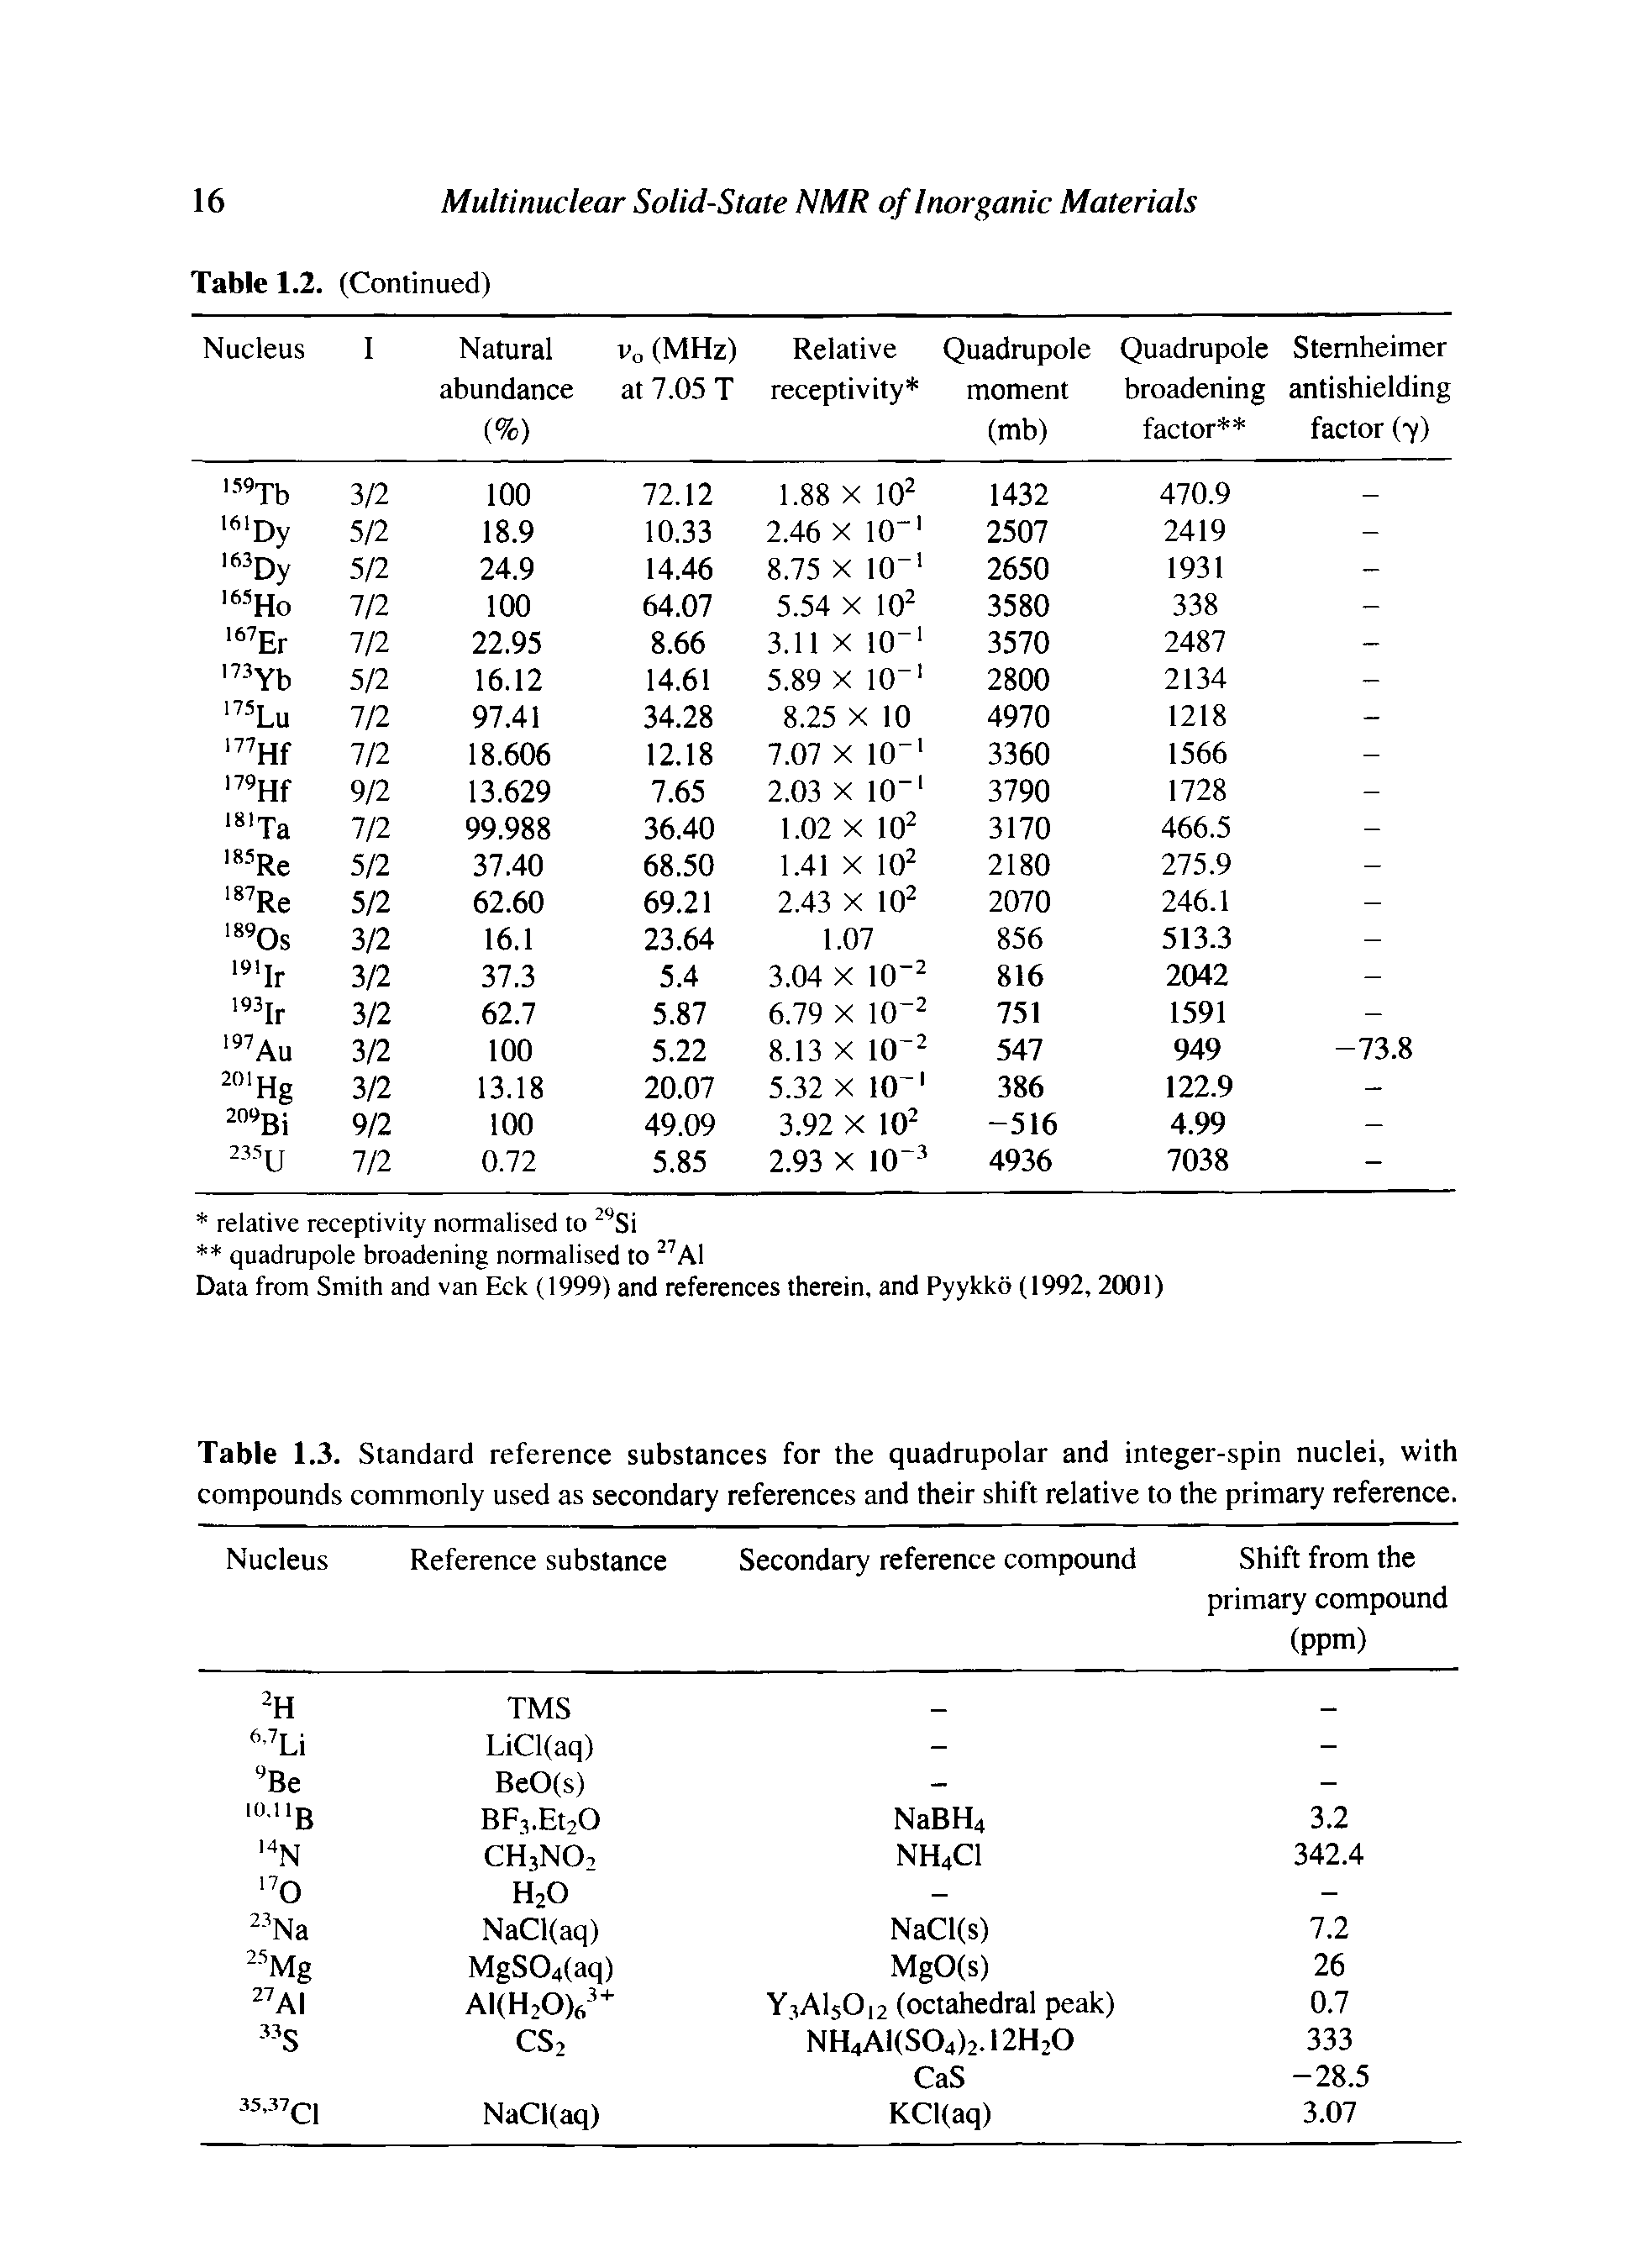 Table 1.3. Standard reference substances for the quadrupolar and integer-spin nuclei, with compounds commonly used as secondary references and their shift relative to the primary reference.